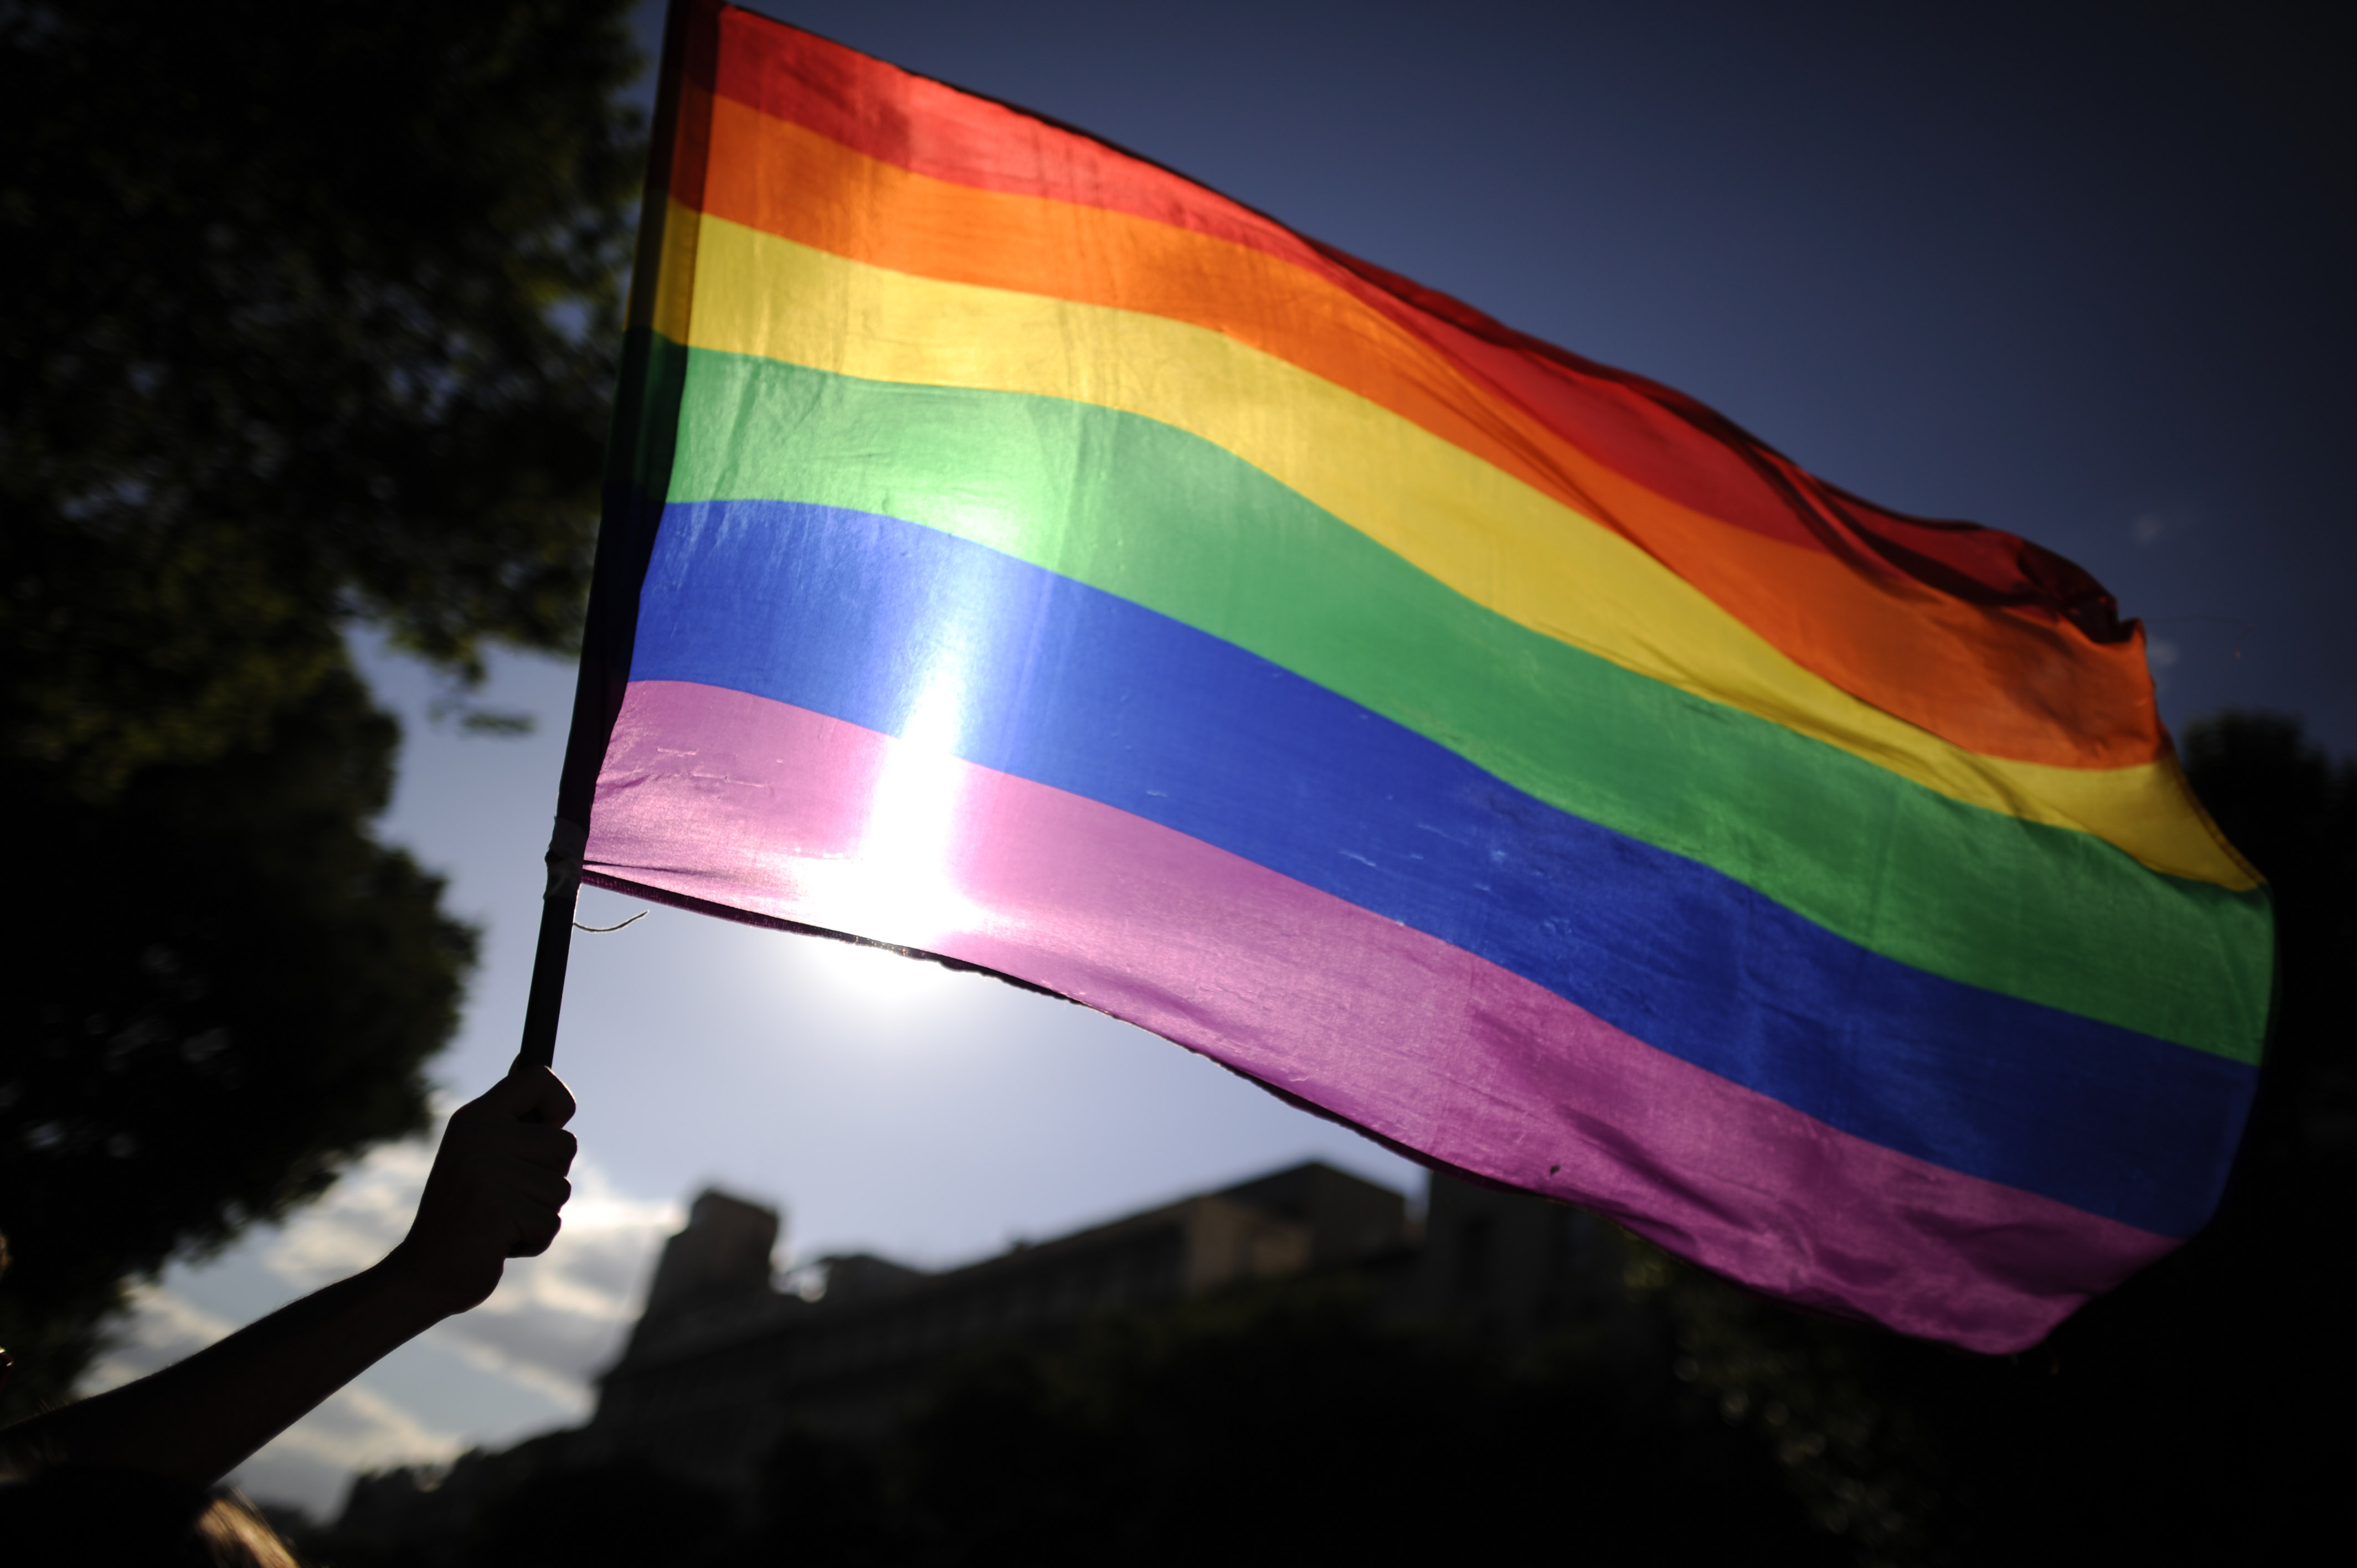 Florida School Yearbook On Hold Due To Images Of Students Holding Rainbow Flags At ‘Don’t Say Gay’ Law Protest